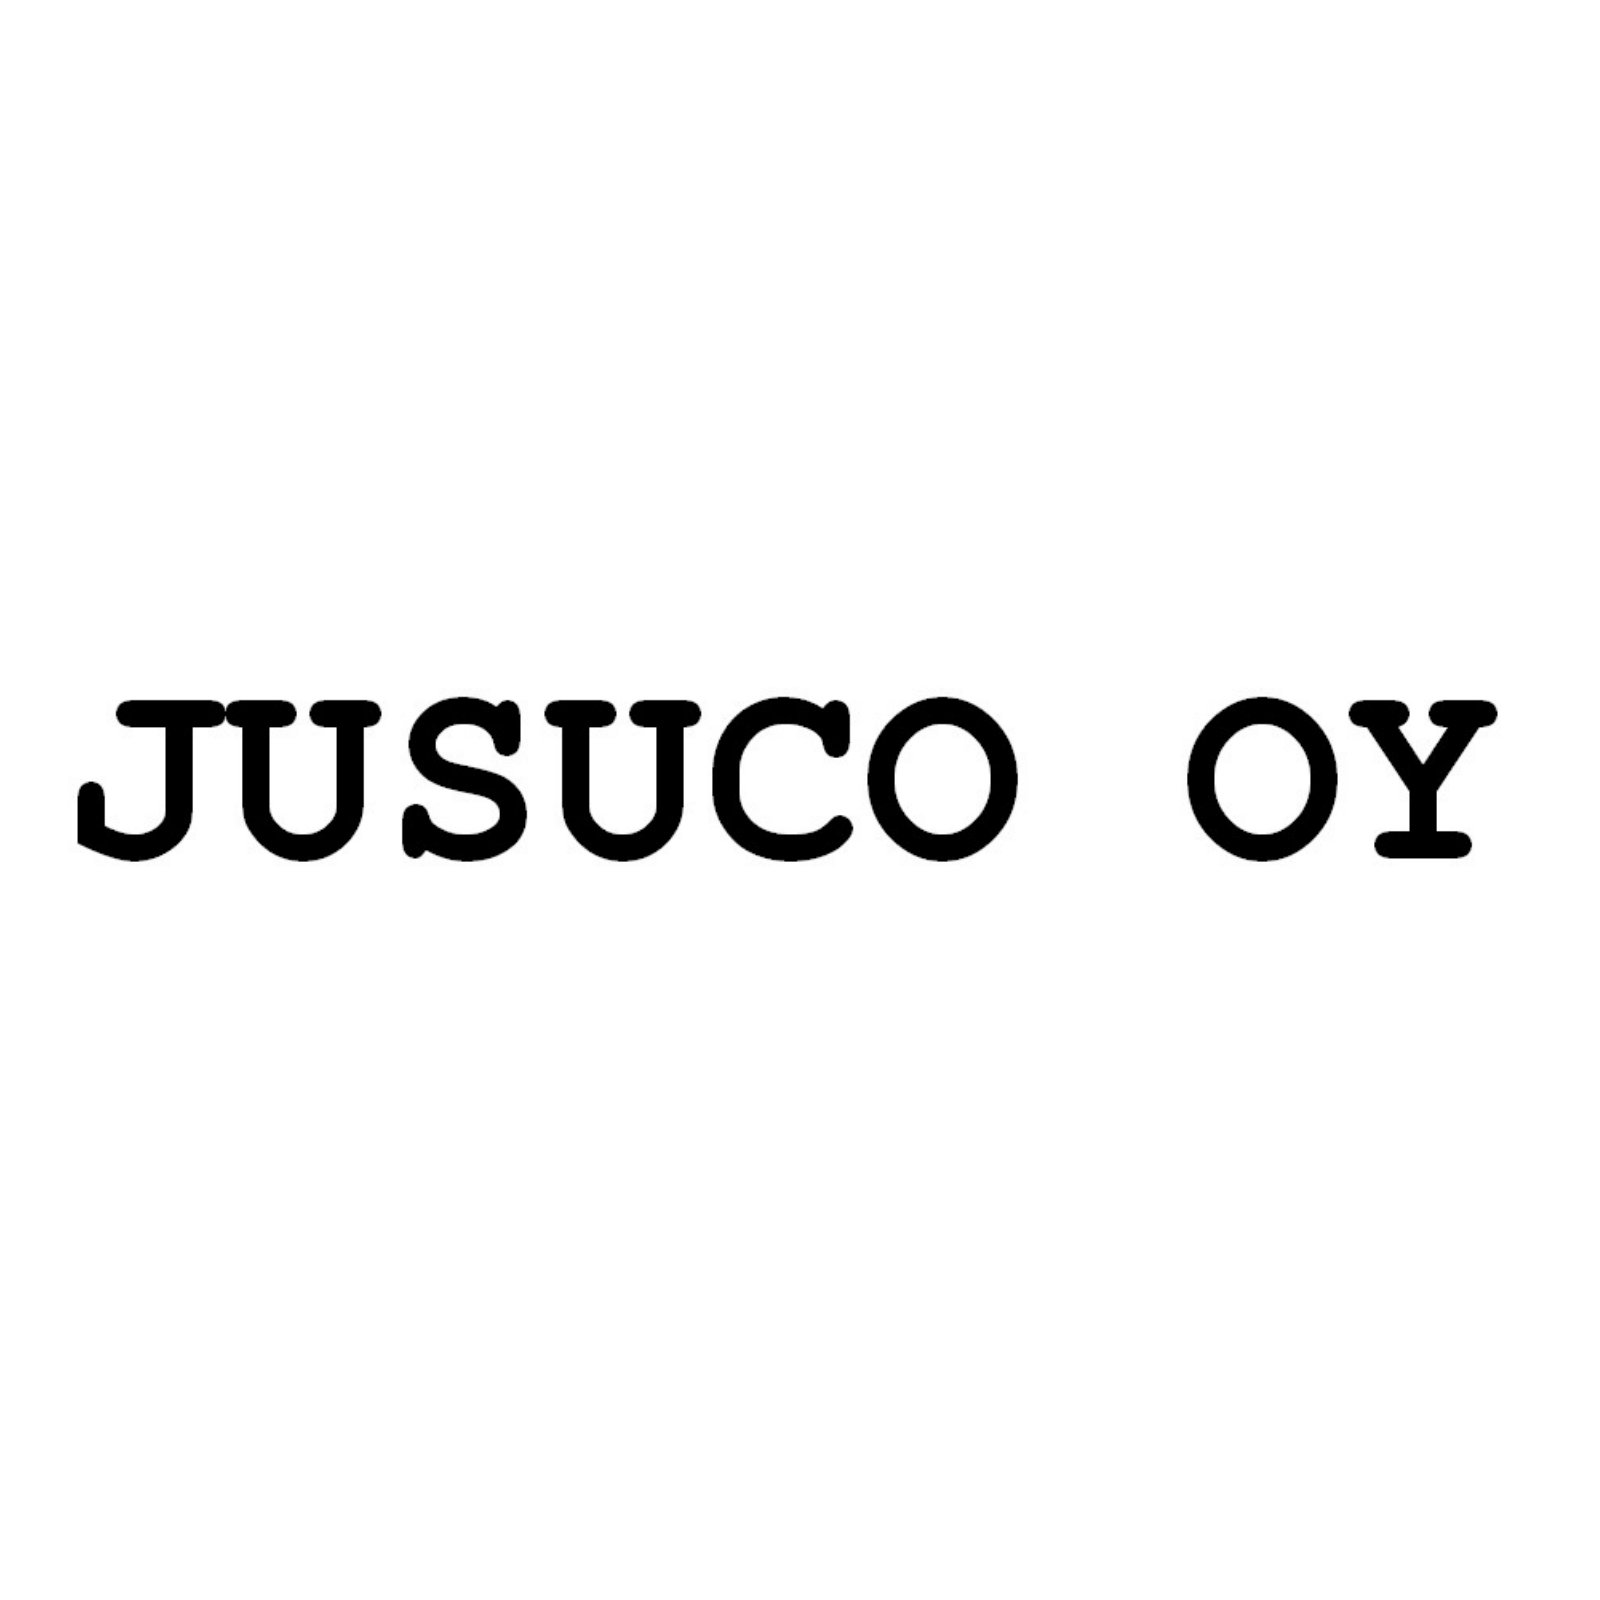 Finland / Jusuco Oy